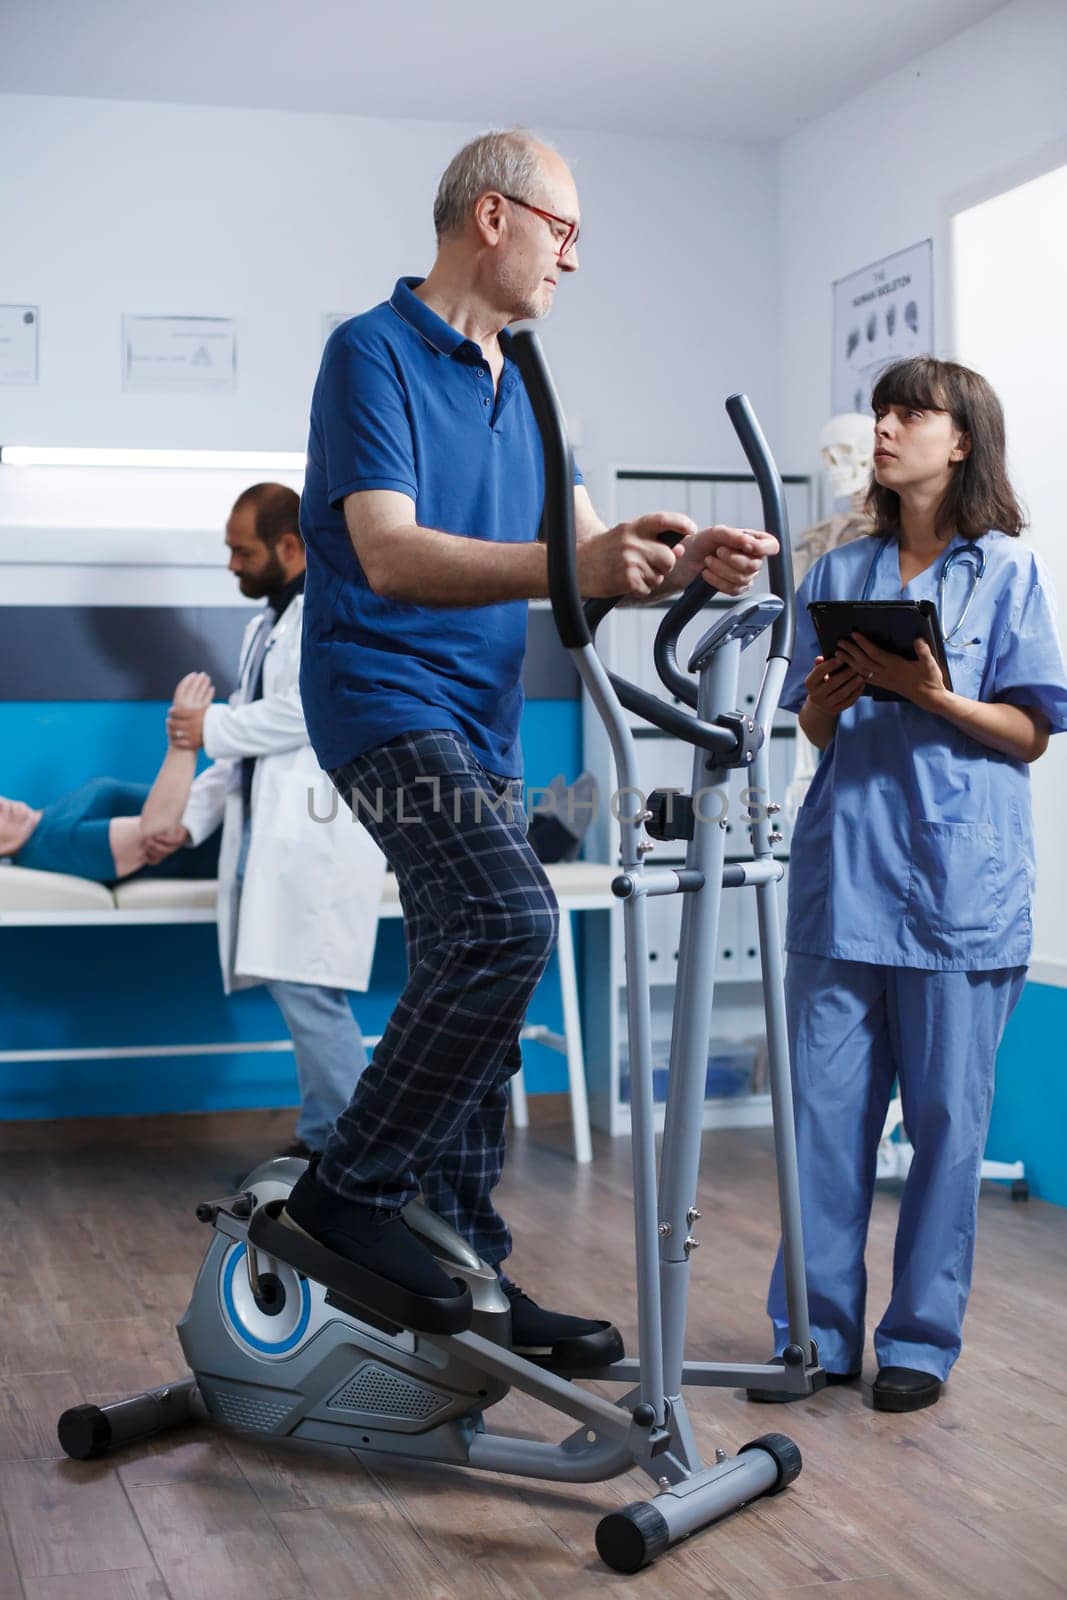 Elderly male patient undergoing physiotherapy on stationary bicycle, with assistance of nurse in blue scrubs. Medical assistant using electronic tablet assists senior citizen with physical therapy.